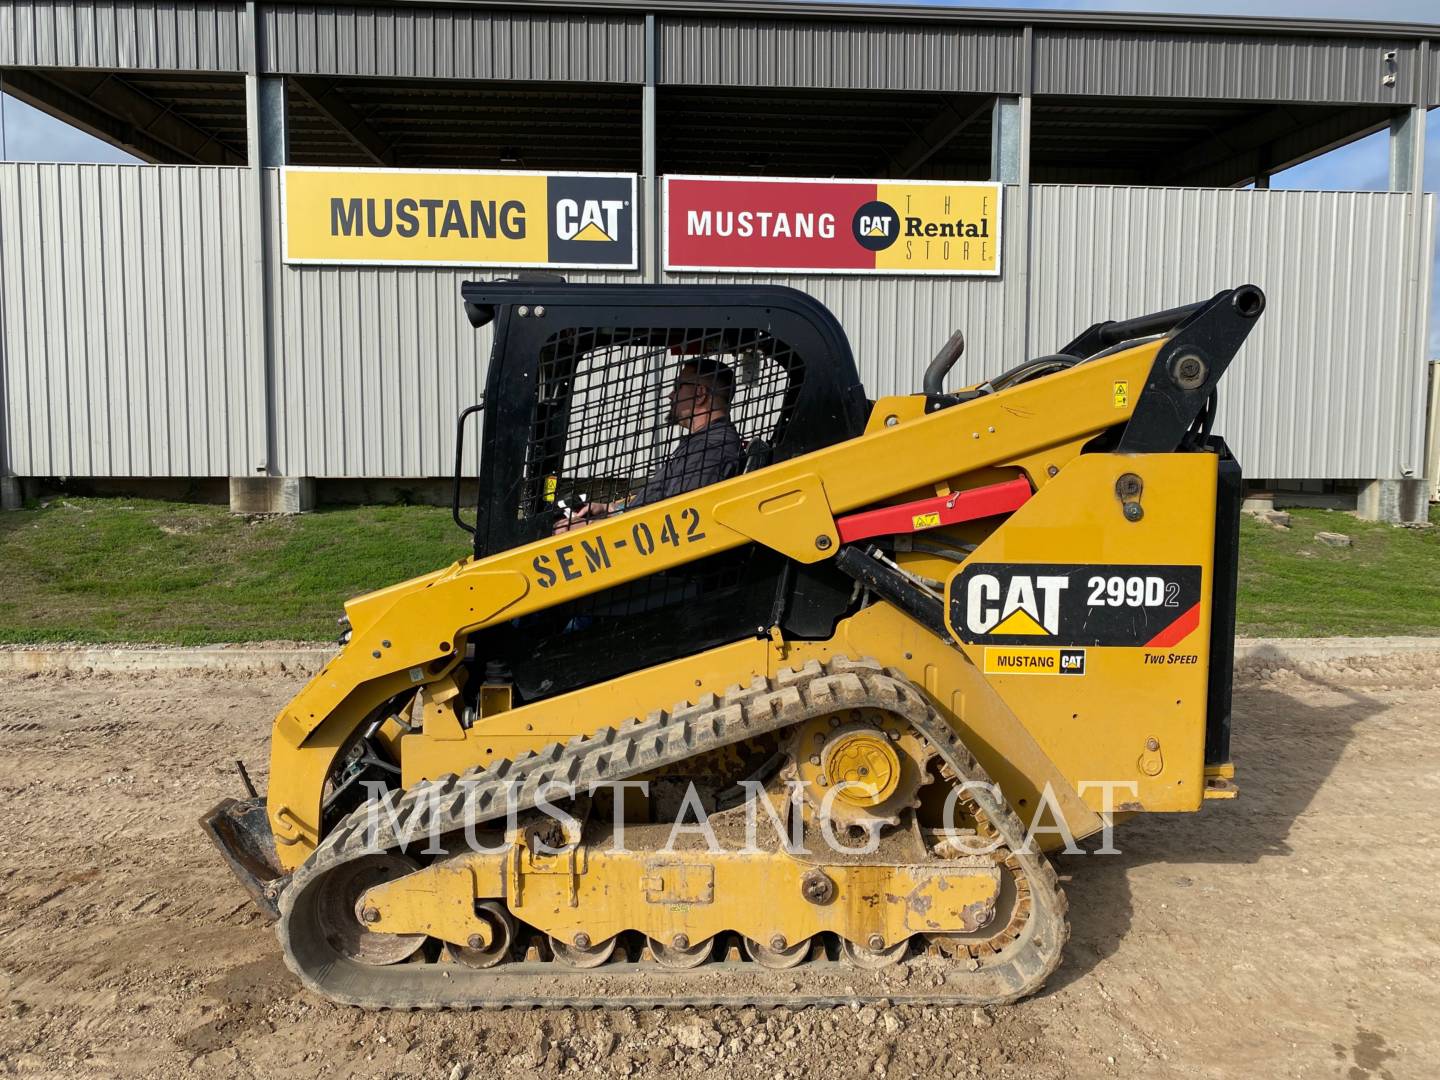 Used Excavating Equipment for Sale in Texas Mustang Cat